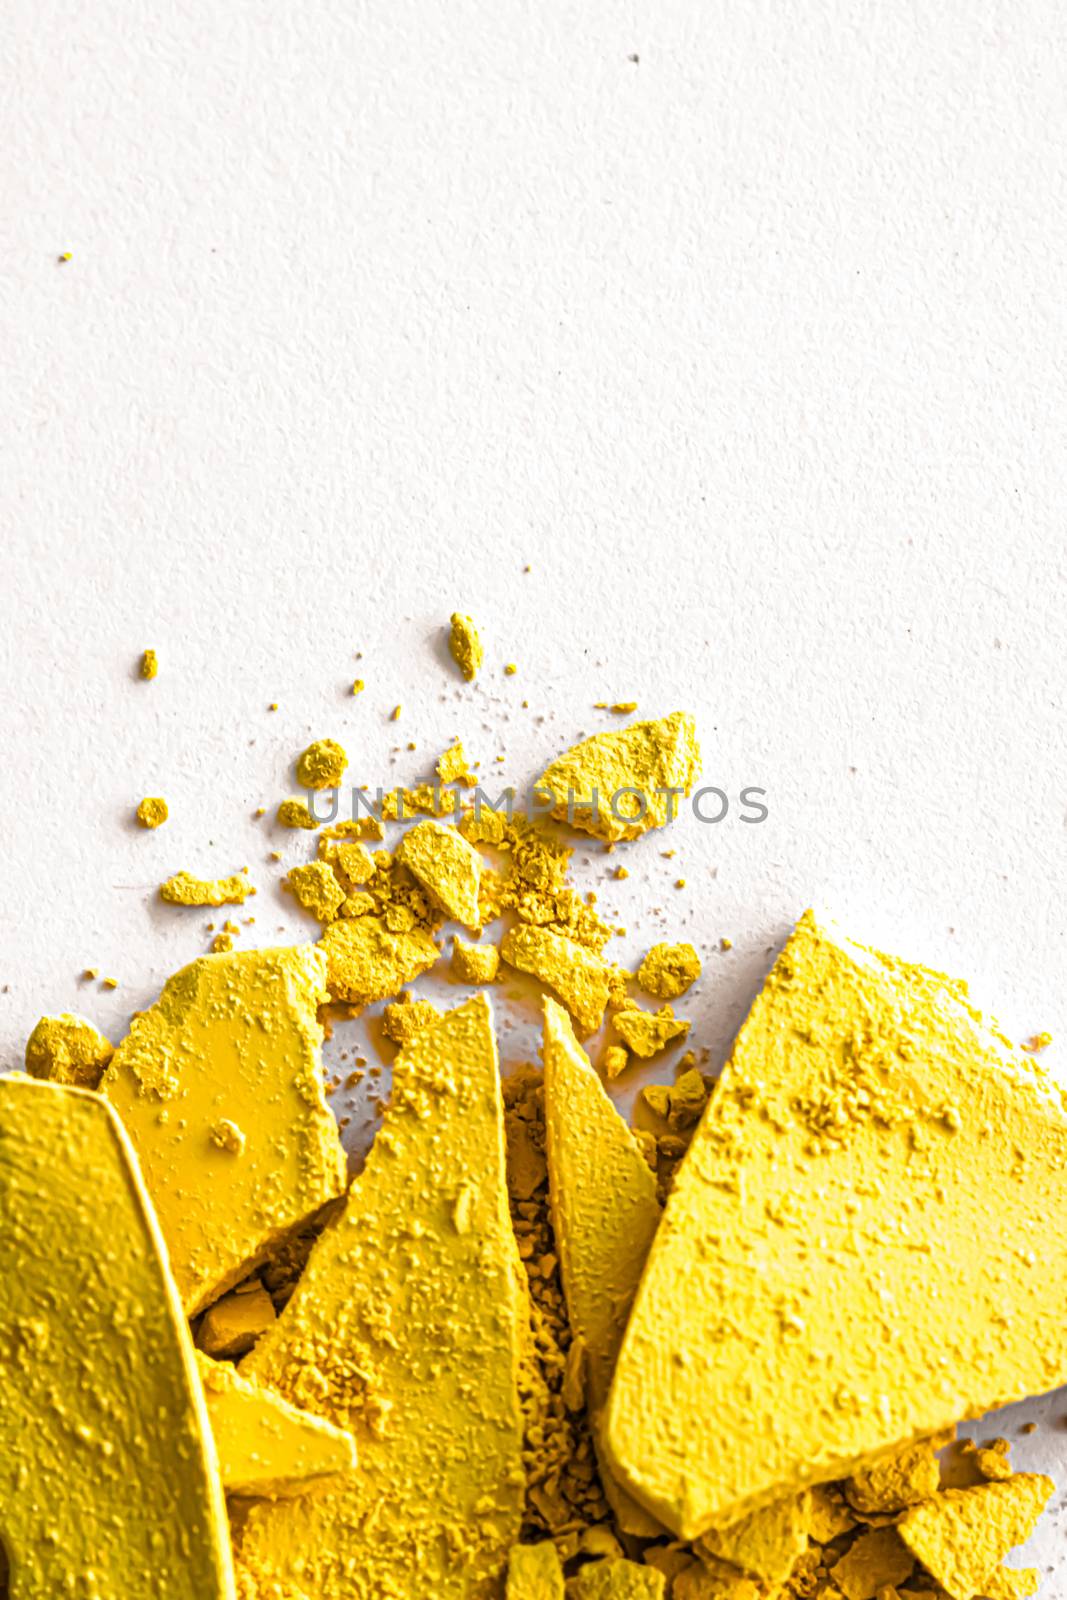 Yellow eye shadow powder as makeup palette closeup isolated on white background, crushed cosmetics and beauty textures